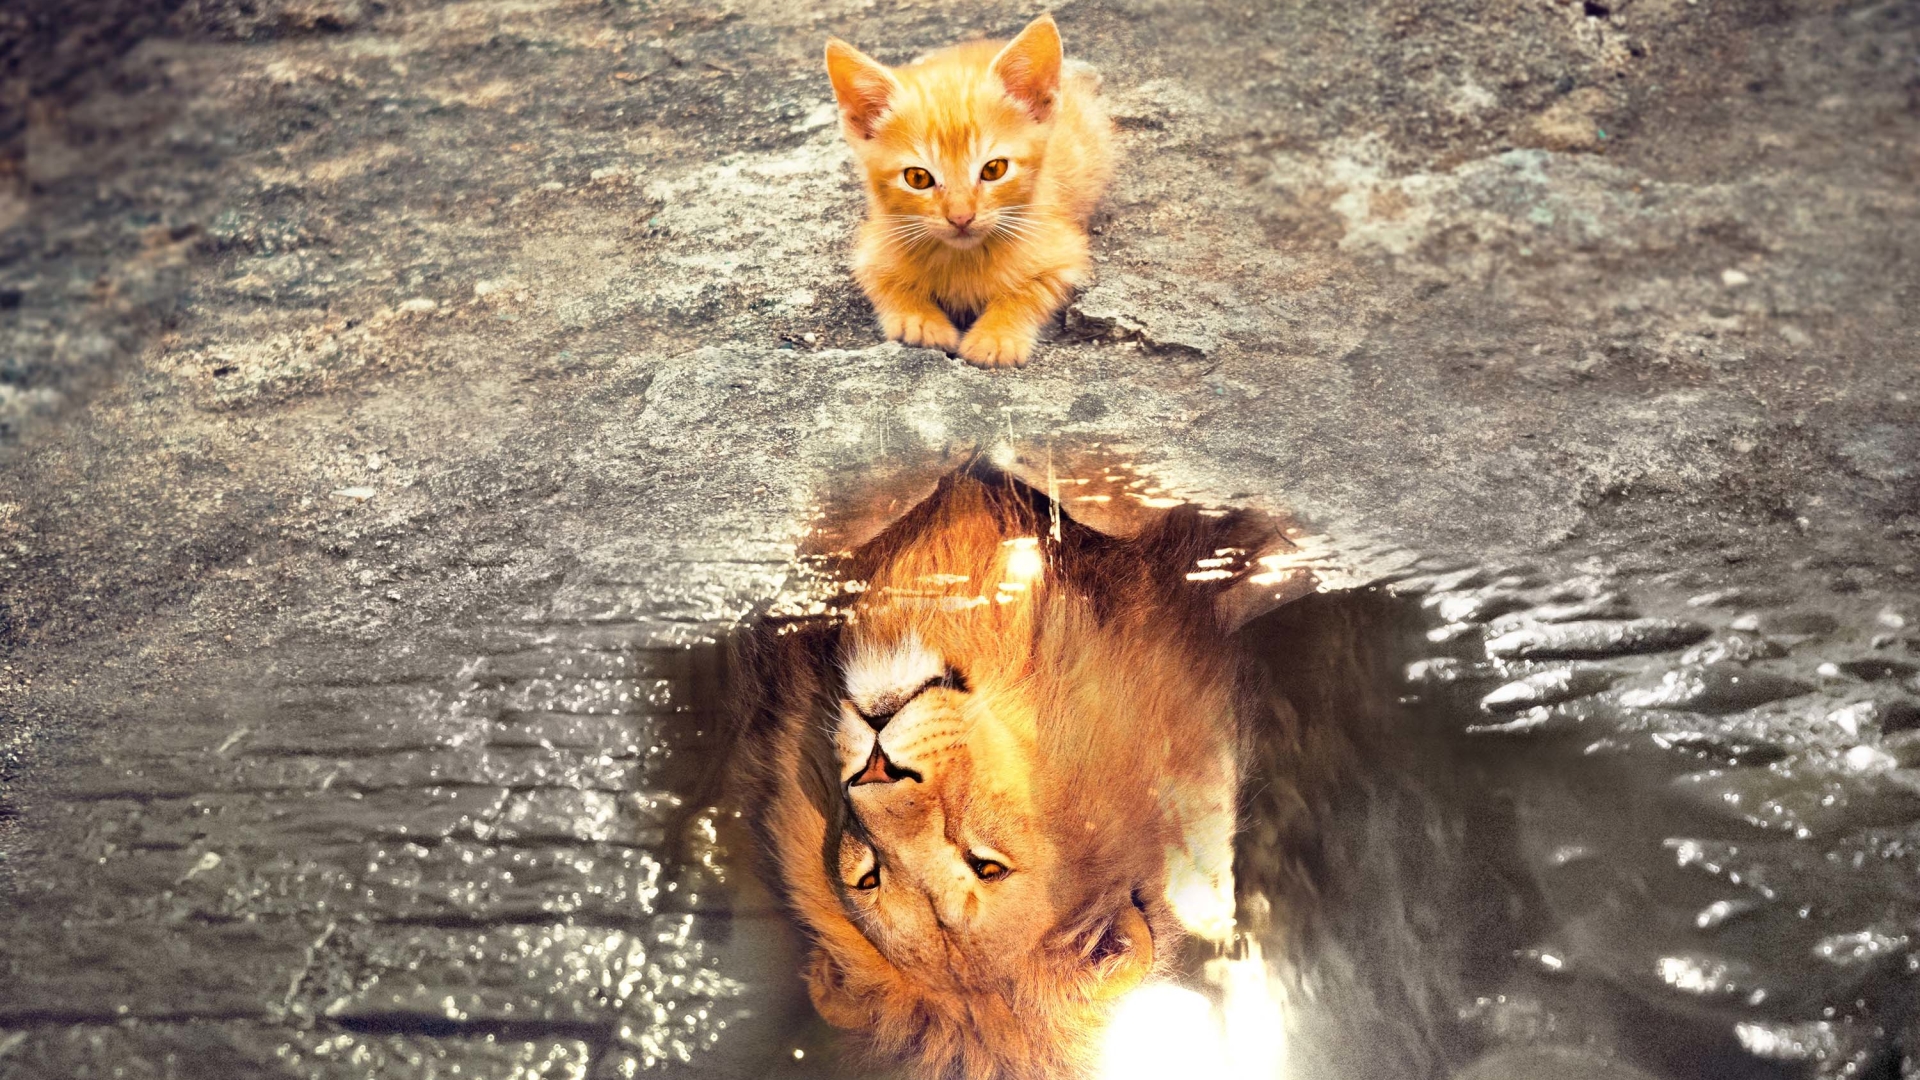 General 1920x1080 nature animals cats kittens lion wild cat water reflection imagination baby animals courageous  cobblestone